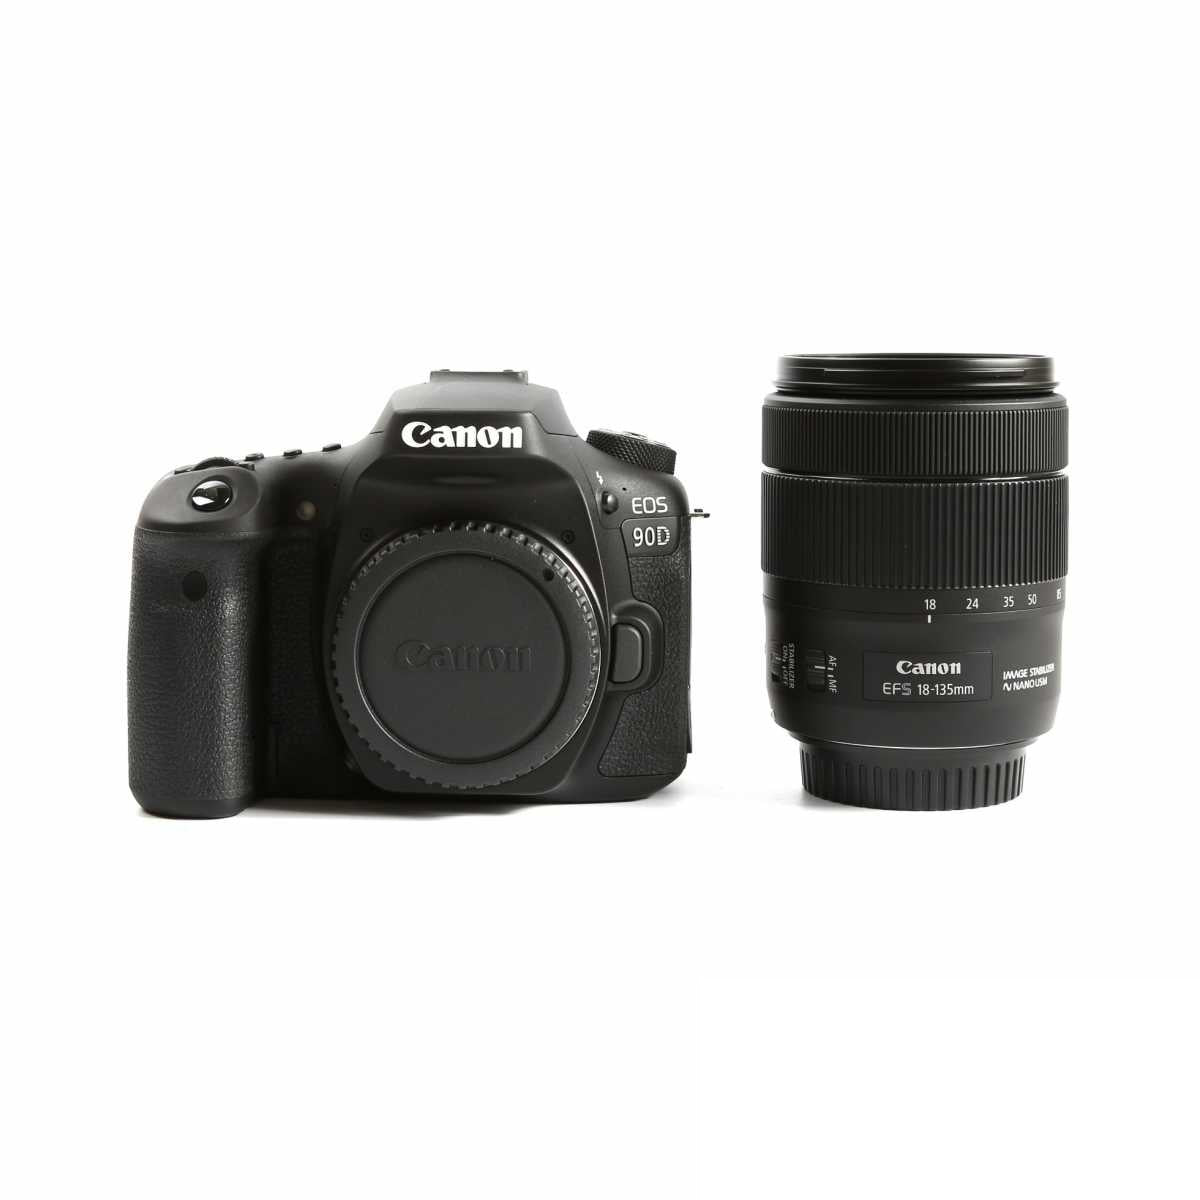 Canon EOS 90D Digital SLR Camera with 18-135mm IS USM Lens - Product Photo 2 - Front view of the camera body and lens